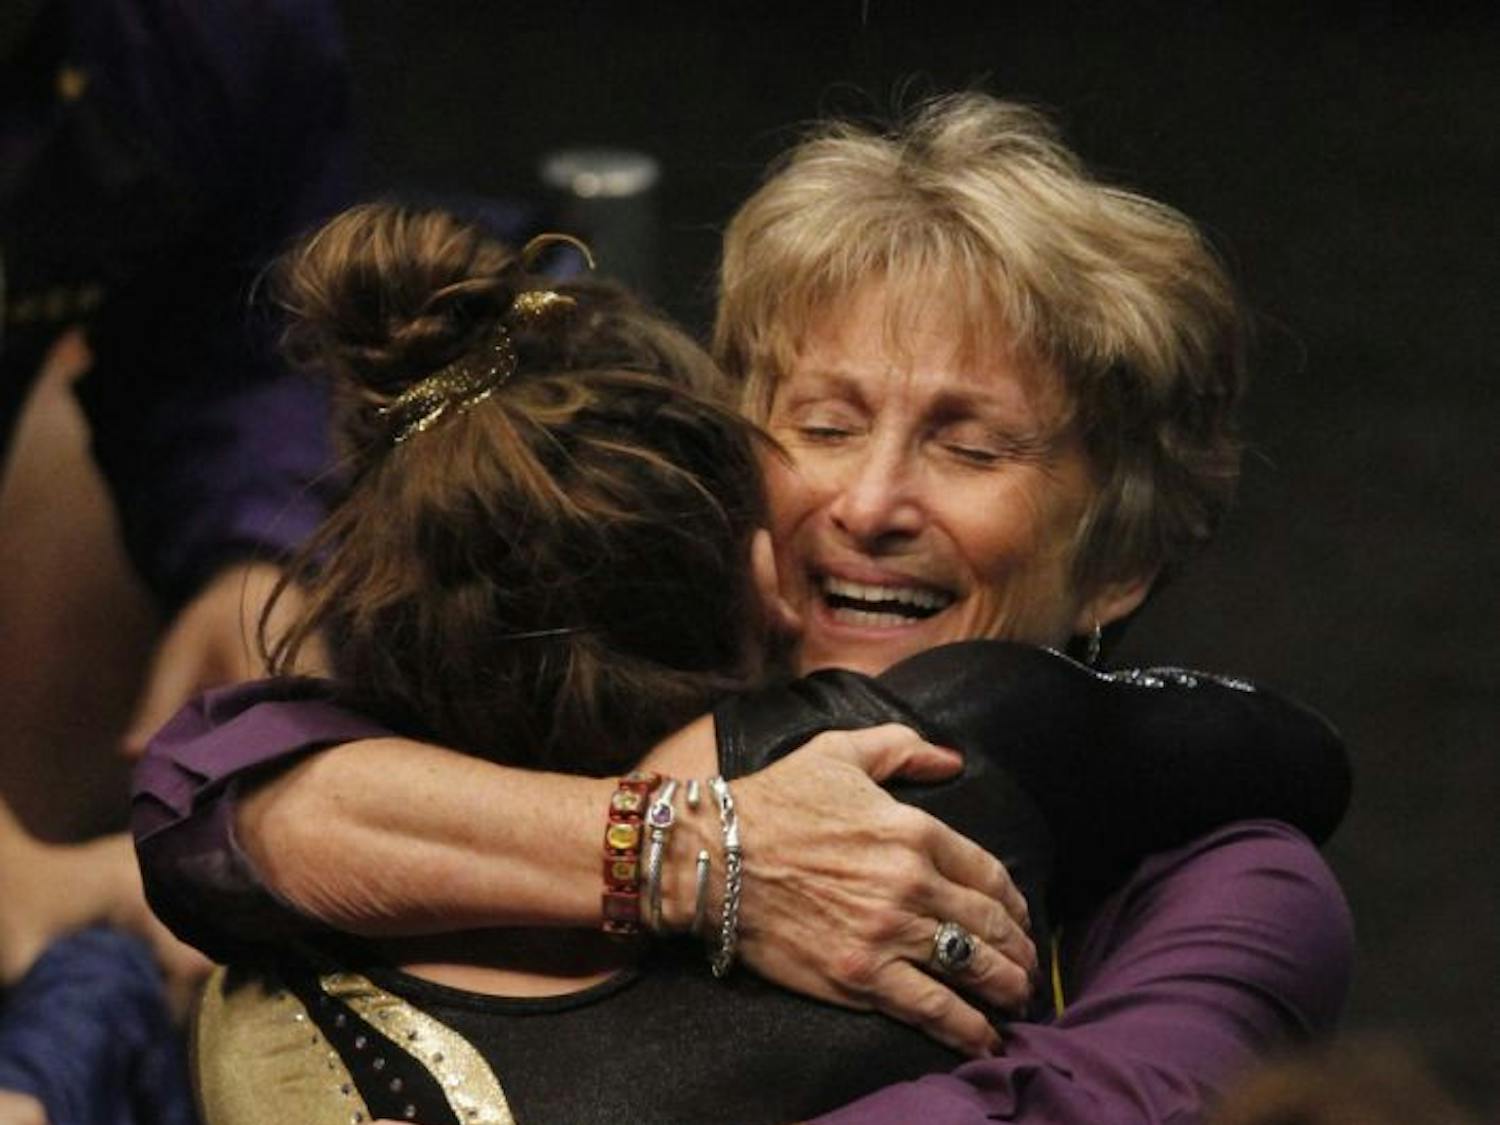 LSU coach "DD" Breaux (right) hugs Sydney Ewing after Ewing's balance beam routine during the NCAA college women's gymnastics championships on April 18, 2014, in Birmingham, Alabama.
&nbsp;